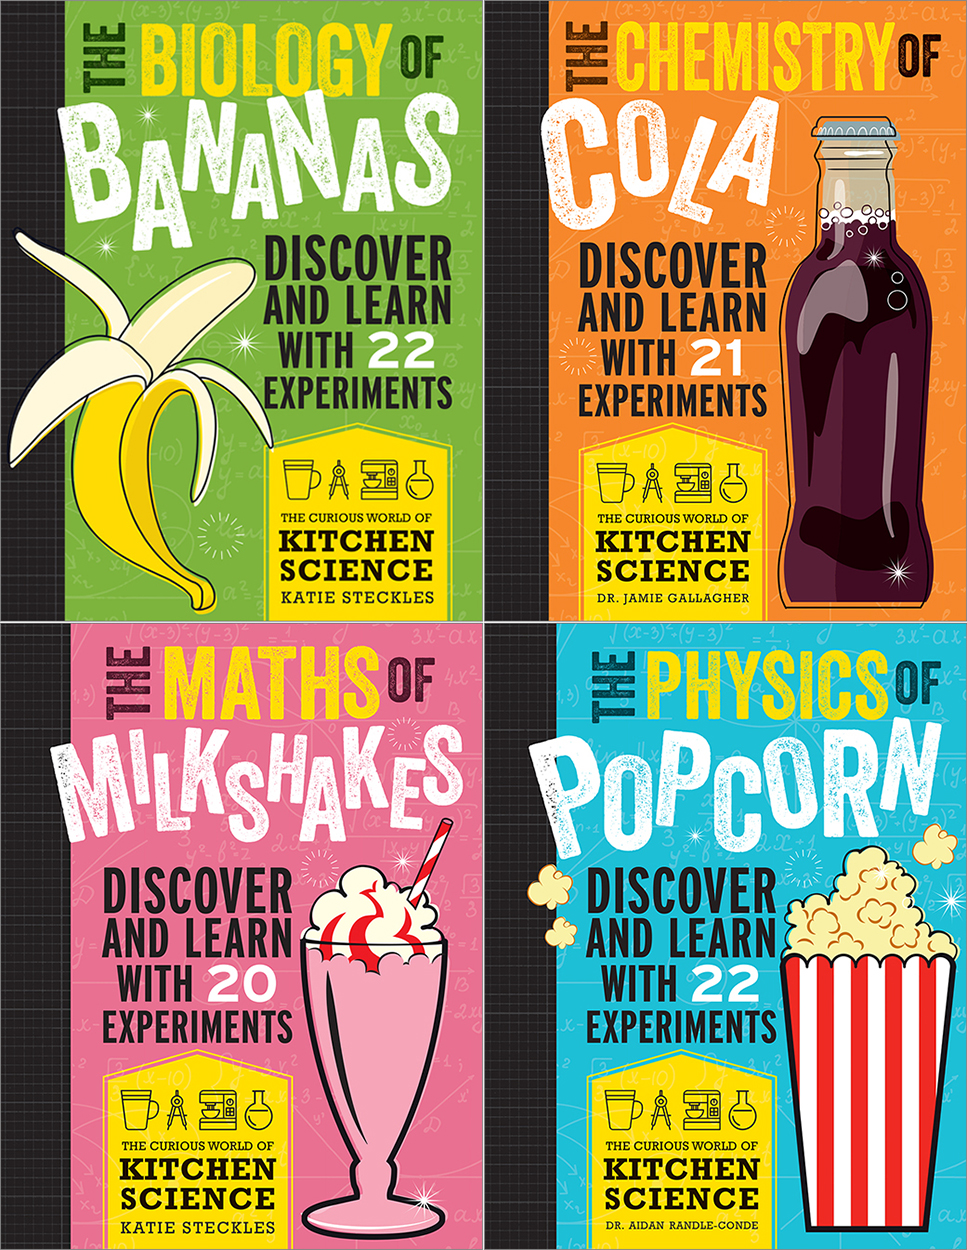 Four colourful book covers arranged in a grid: The Biology of Bananas, The Chemistry of Cola, The Maths of Milkshakes and The Physics of Popcorn.